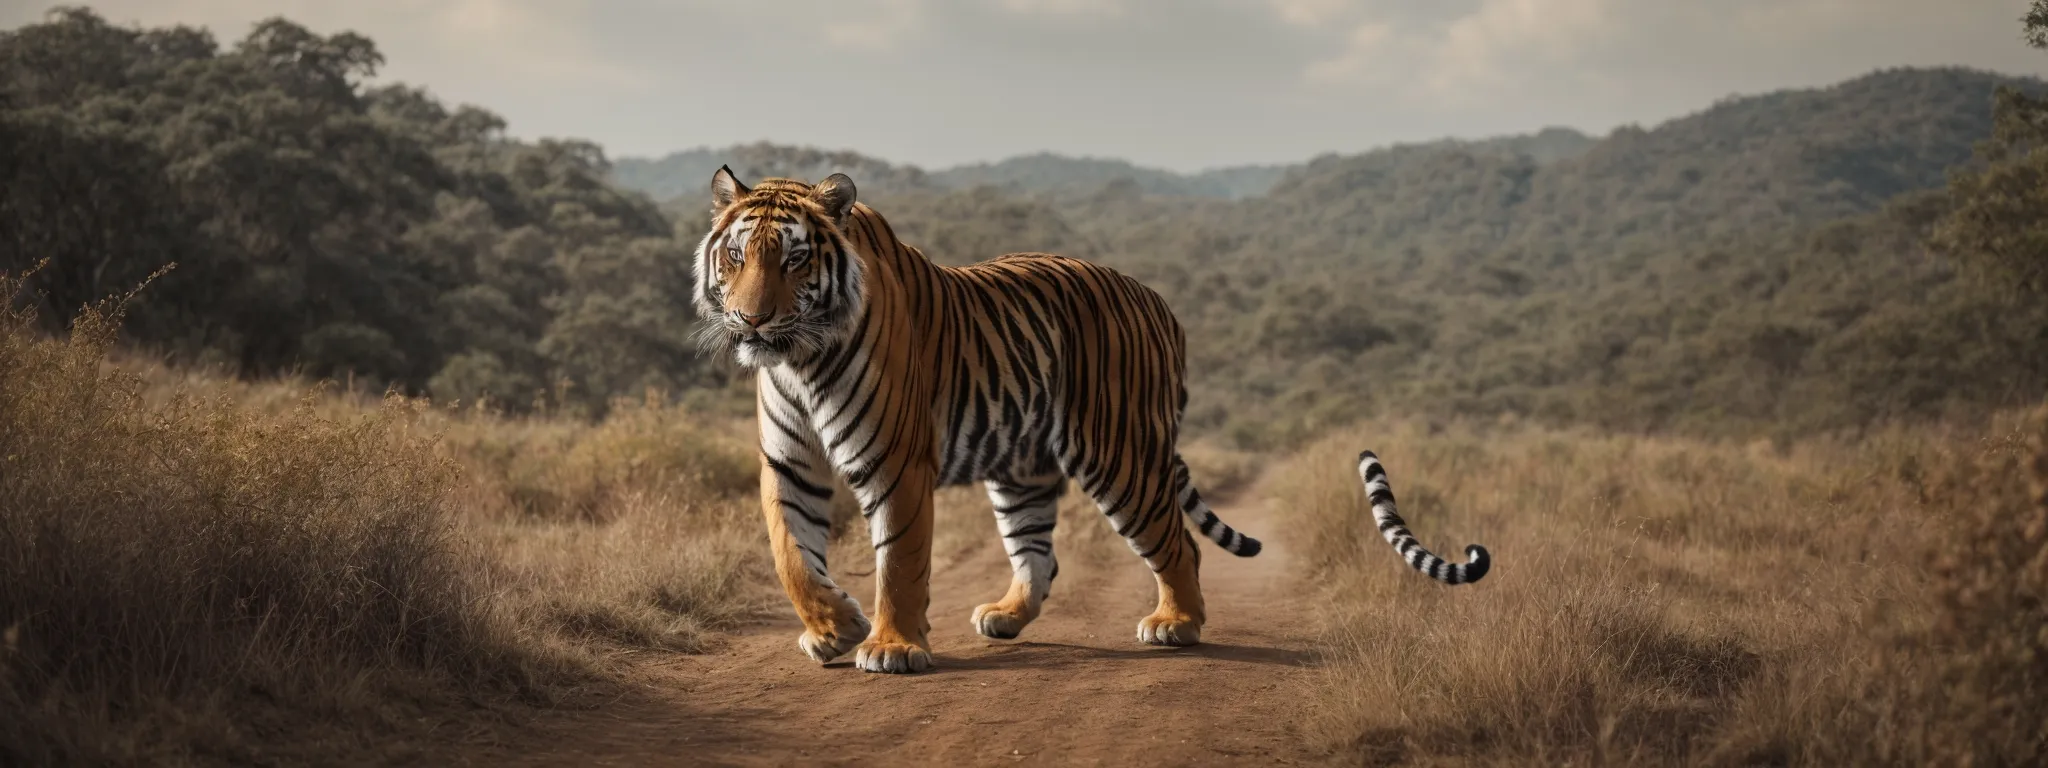 a majestic tiger walks steadily across a dense digital landscape symbolizing fiscal tiger's growing online authority.